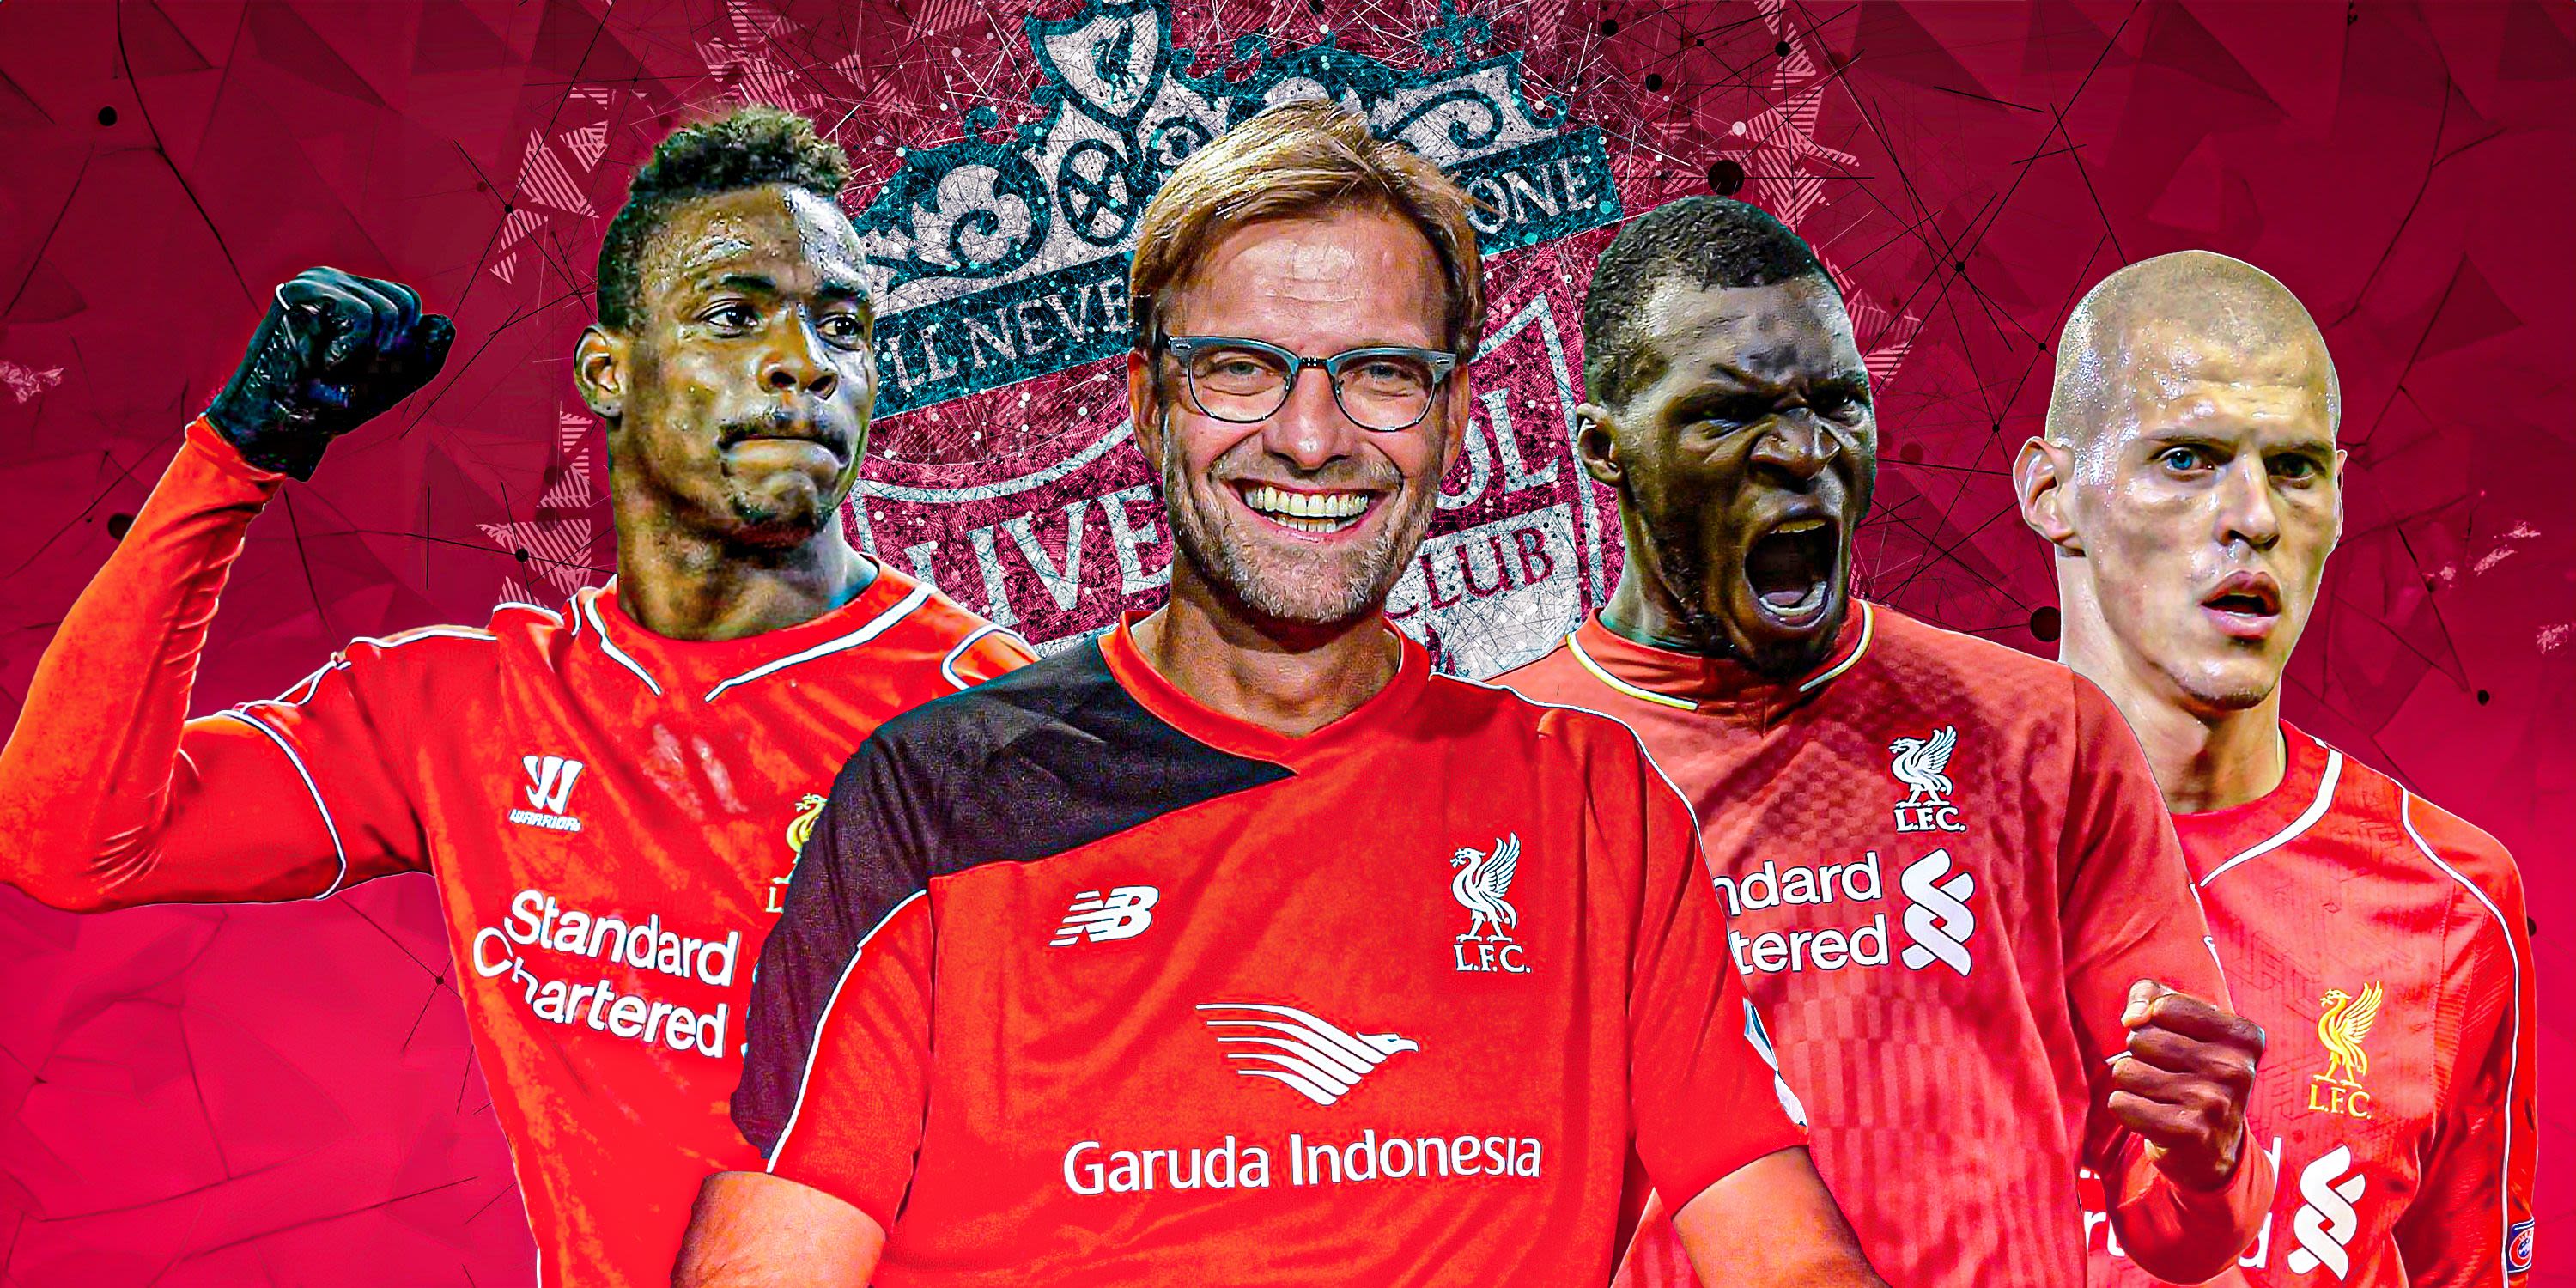 What happened to the 11 Liverpool players Jurgen Klopp sold in his first summer?